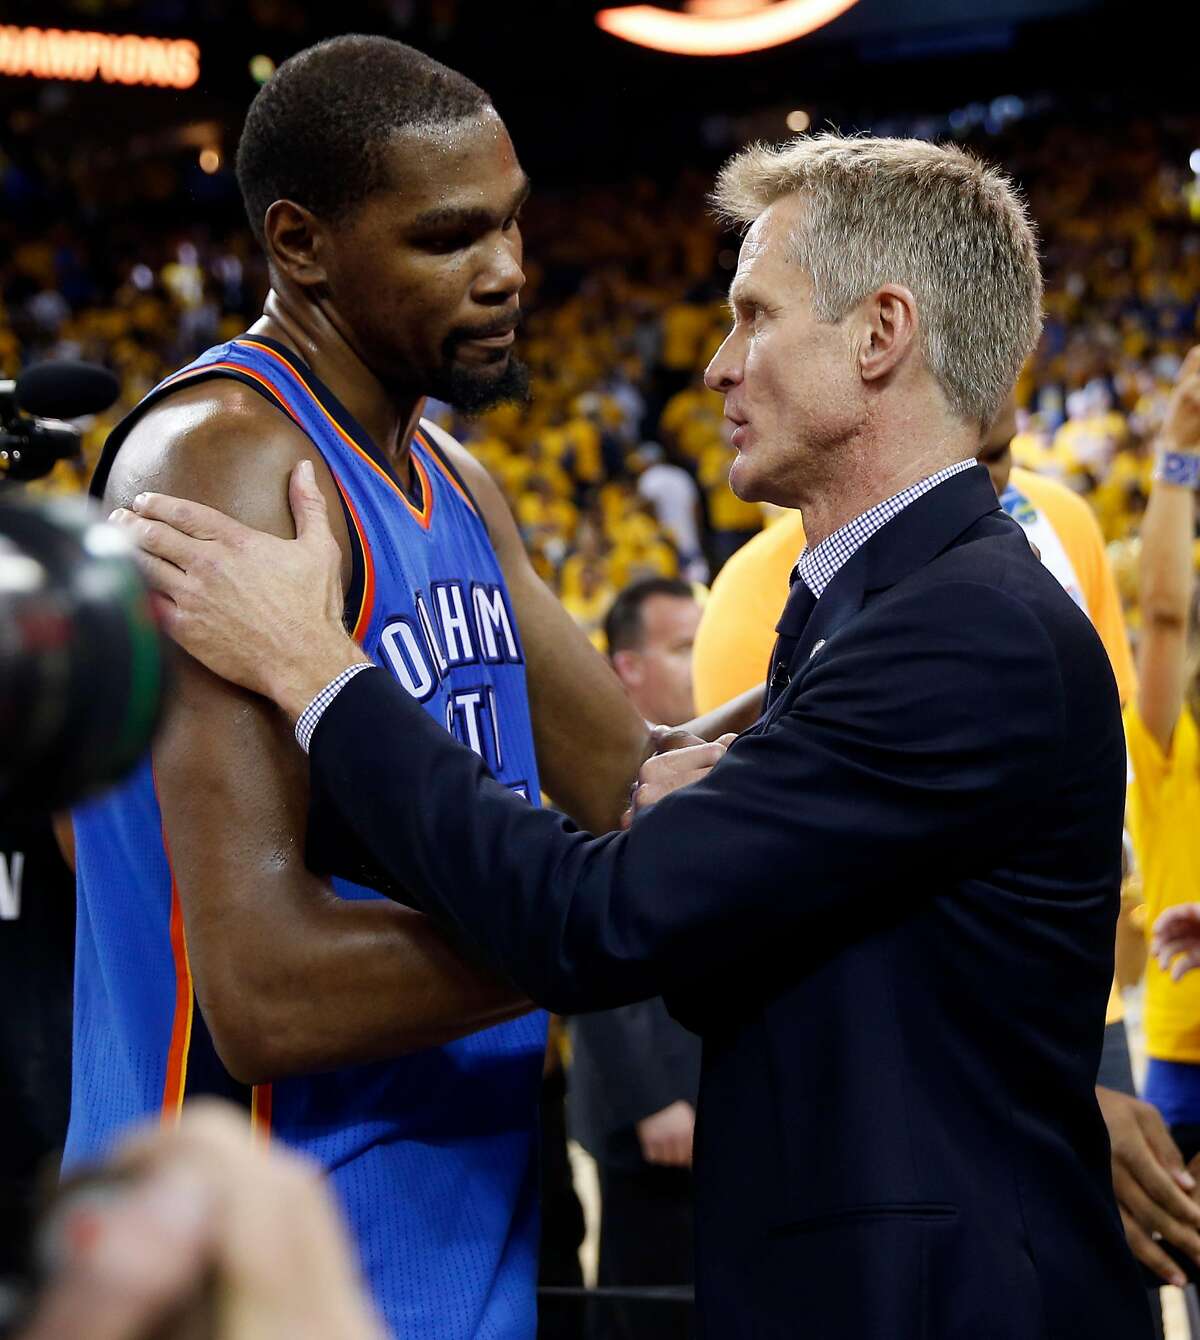 Golden State Warriors' head coach Steve Kerr and Oklahoma City Thunder's Kevin Durant meet after Warriors' 96-88 win in Game 7 of NBA Playoffs' Western Conference finals at Oracle Arena in Oakland, Calif., on Monday, May 30, 2016.